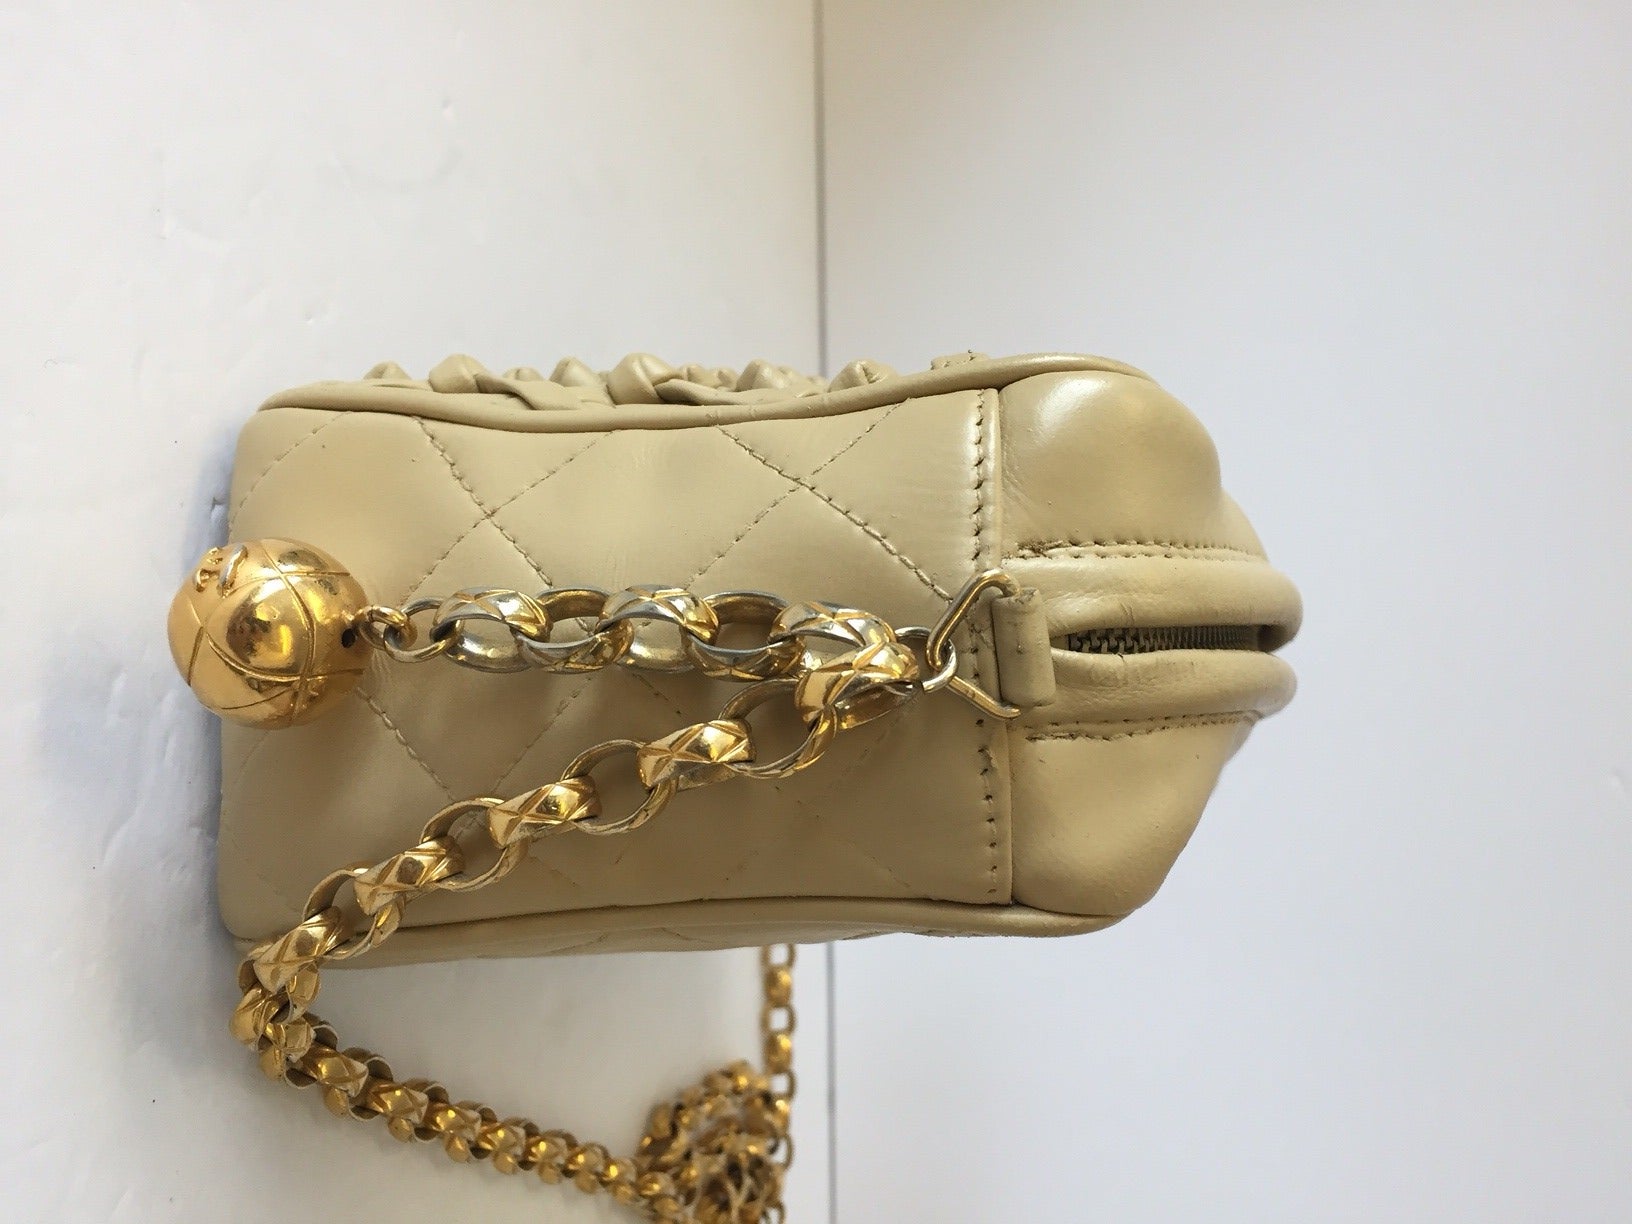 Chanel camera shaped cross body bag. Features knotted front pouch and gold CC logo charm. Single gold link strap.

Minimal signs of wear. Leather stands up quite well despite the age other than some slight cracking around the zipper. Clean